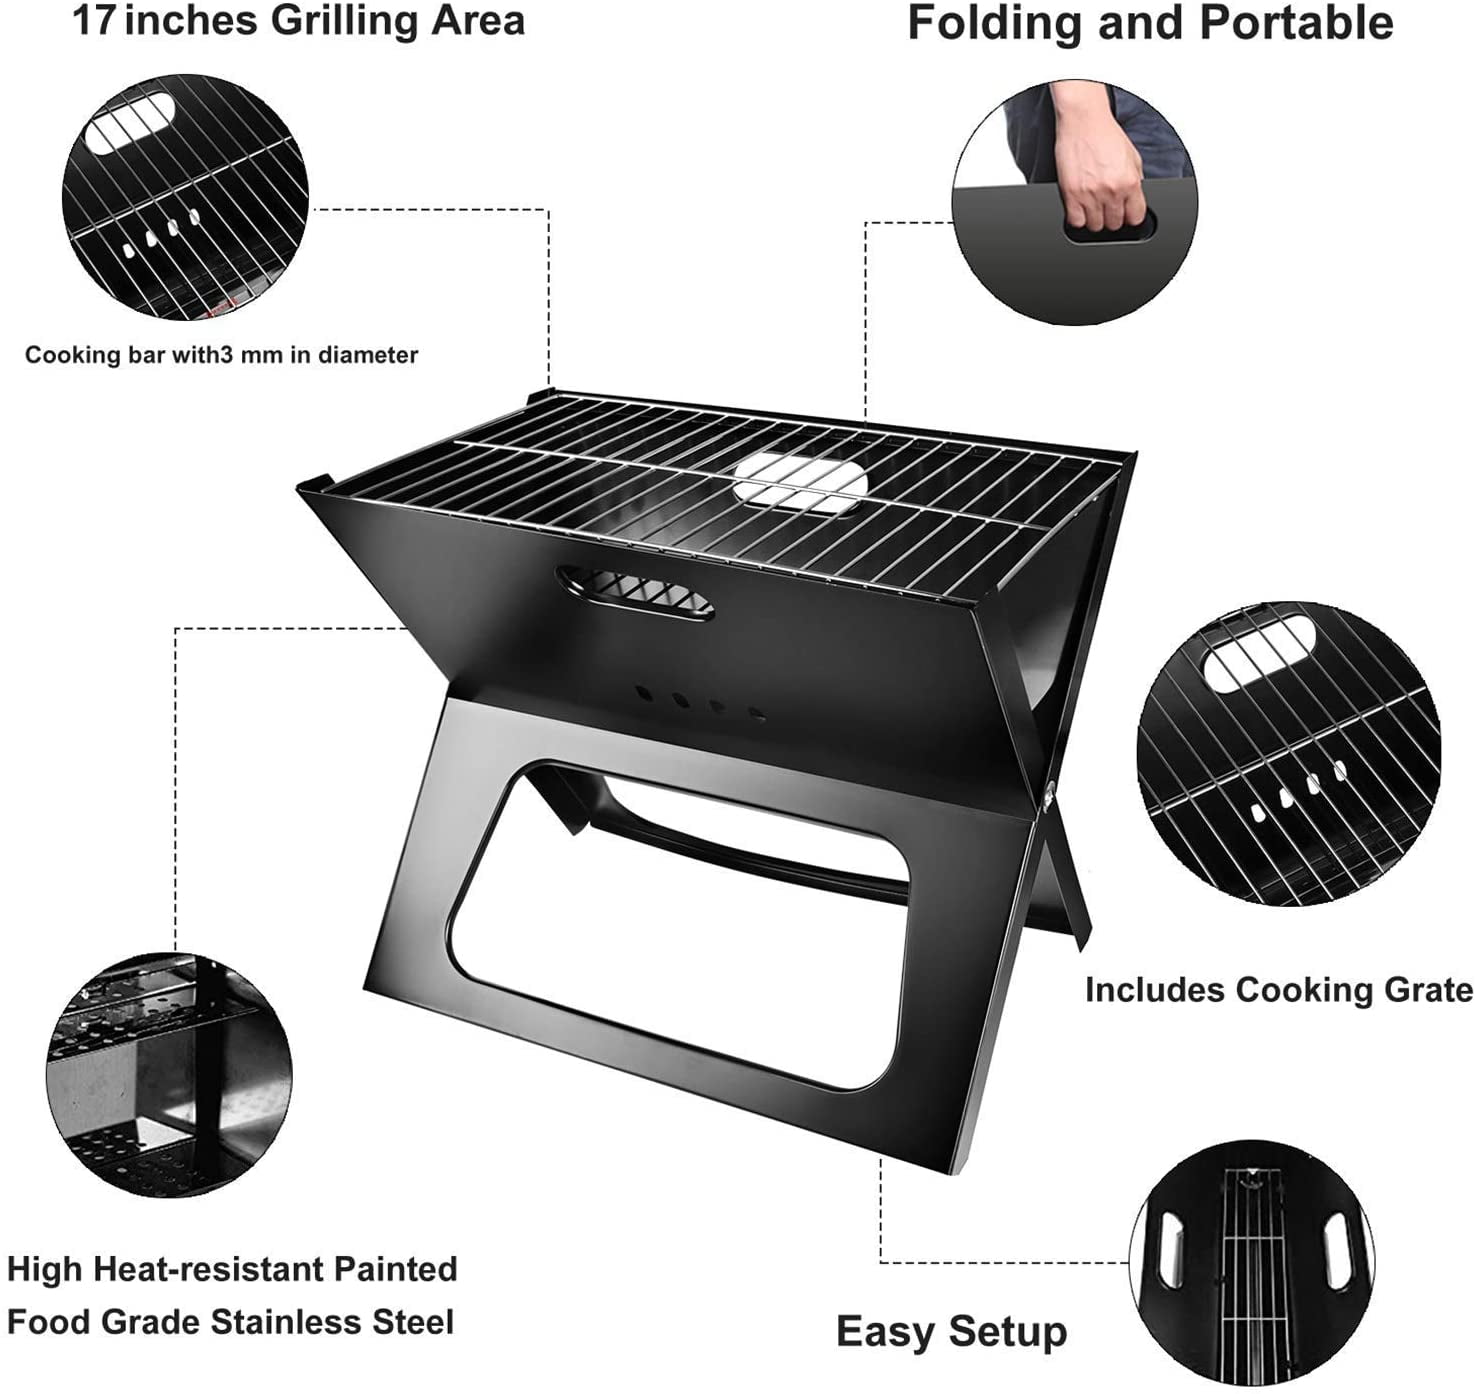 Black Portable Mini Foldable Charcoal Barbecue BBQ Charcoal Barbecue Picnic Barbecue Garden Camping Party Beach Outdoor Barbecue WOSTOO Charcoal Barbecue